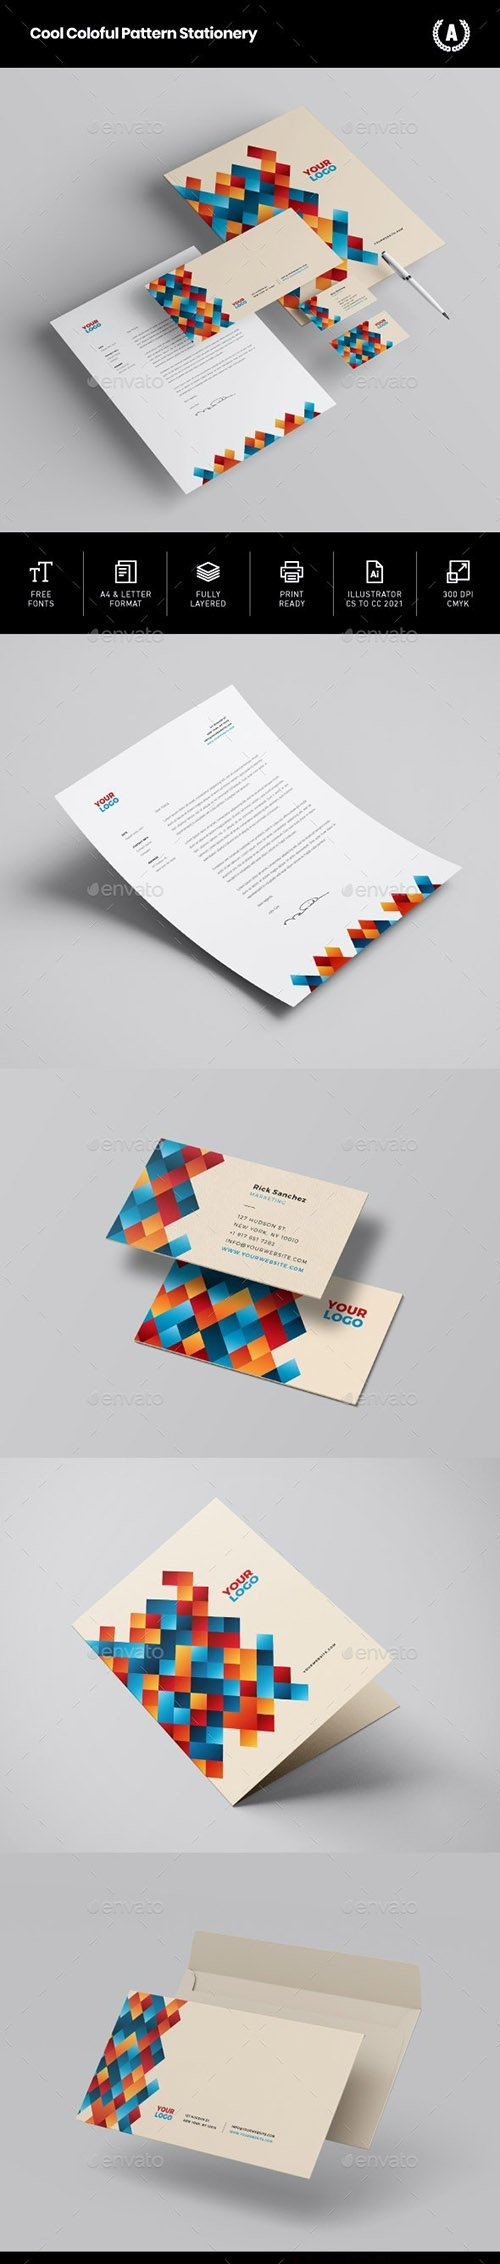 Cool Colorful Pattern Stationery 29328025